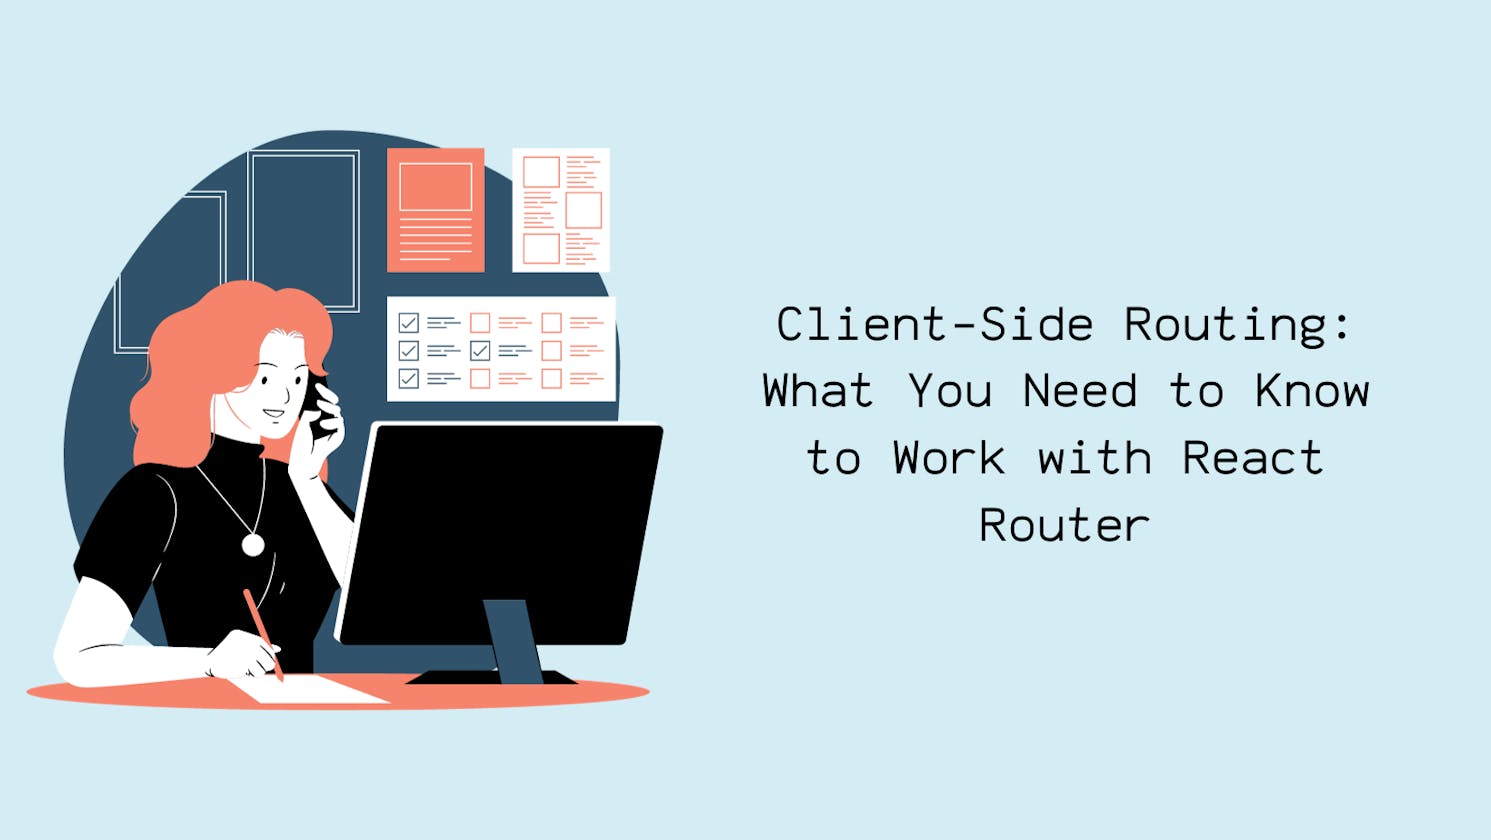 Client-Side Routing: What You Need to Know to Work with React Router